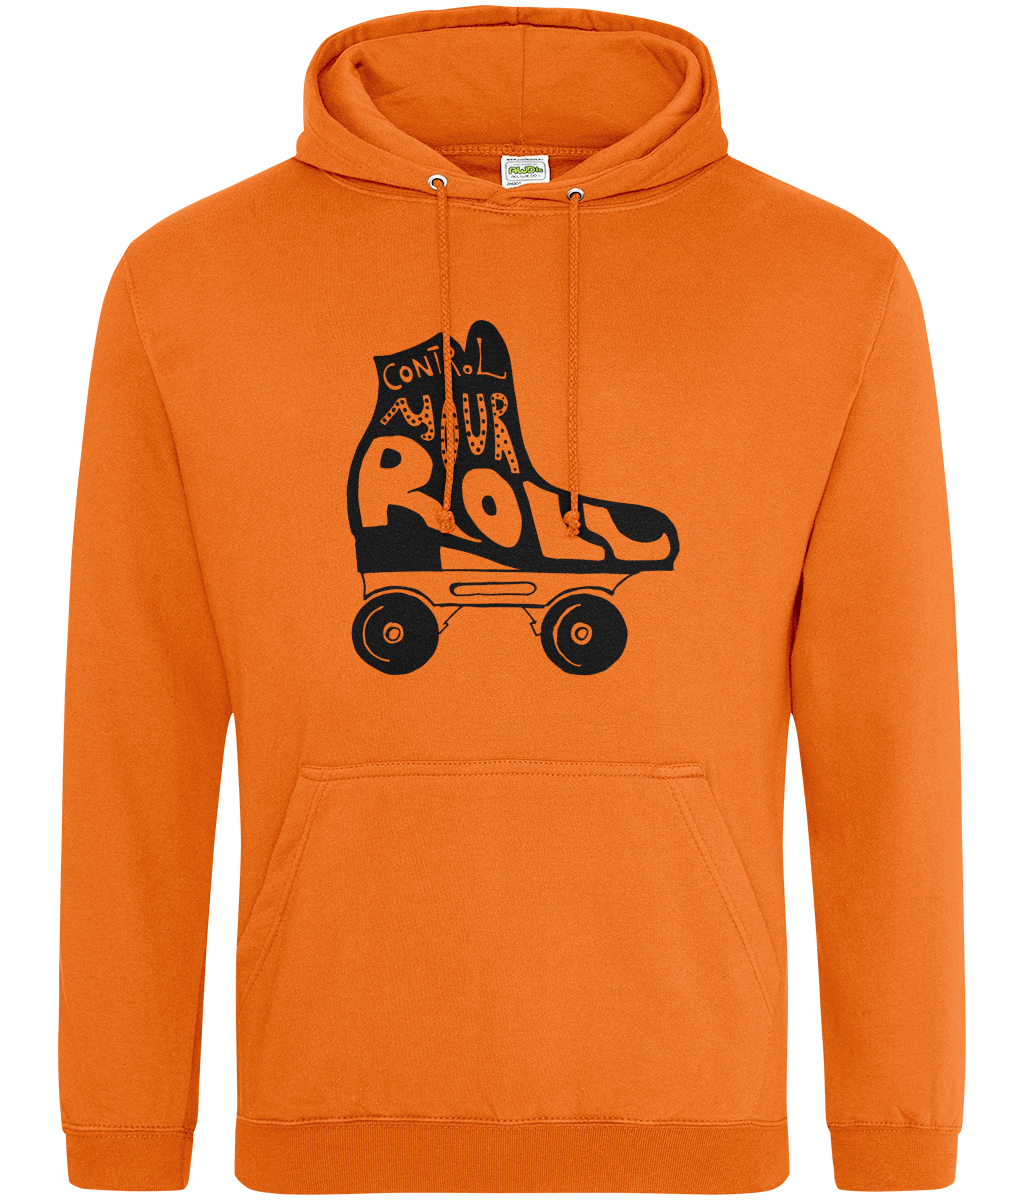 Hoodie Control your roll by Piem